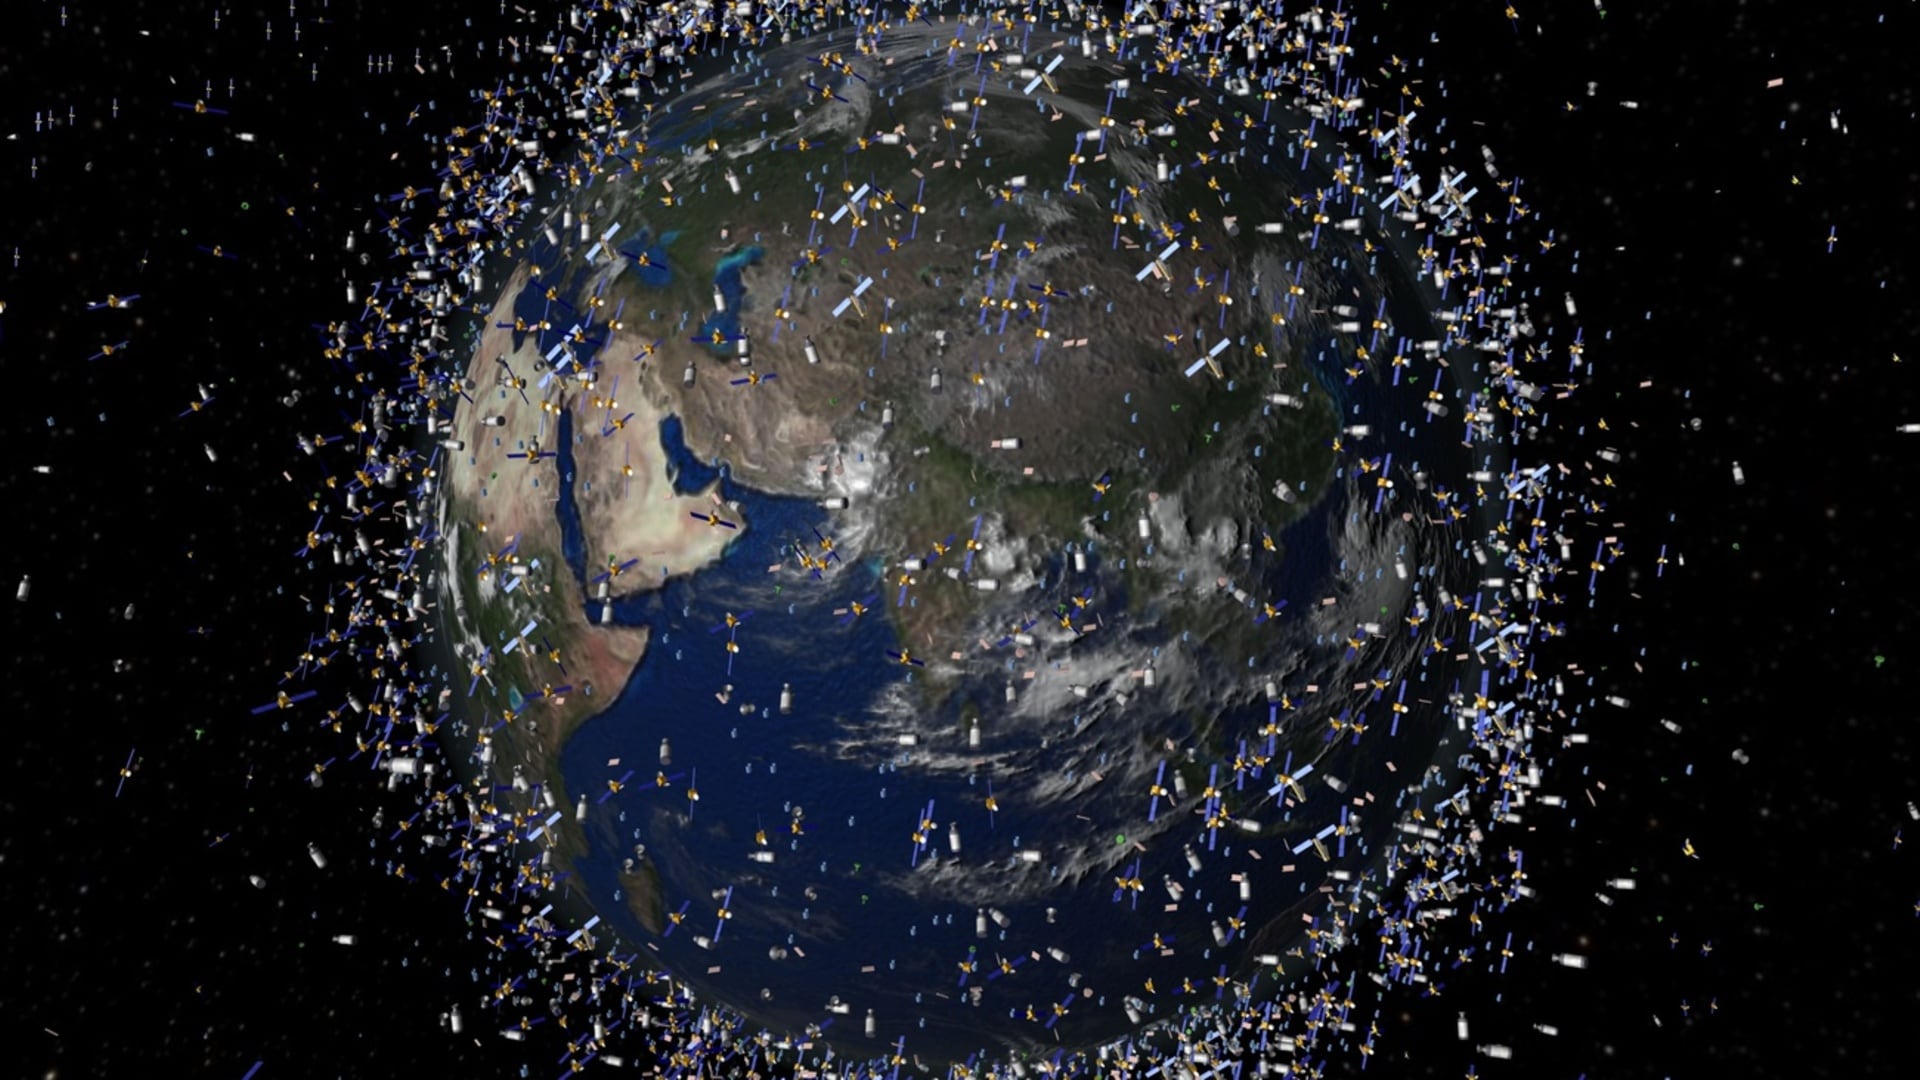 Space debris: a Swiss warning to the world

